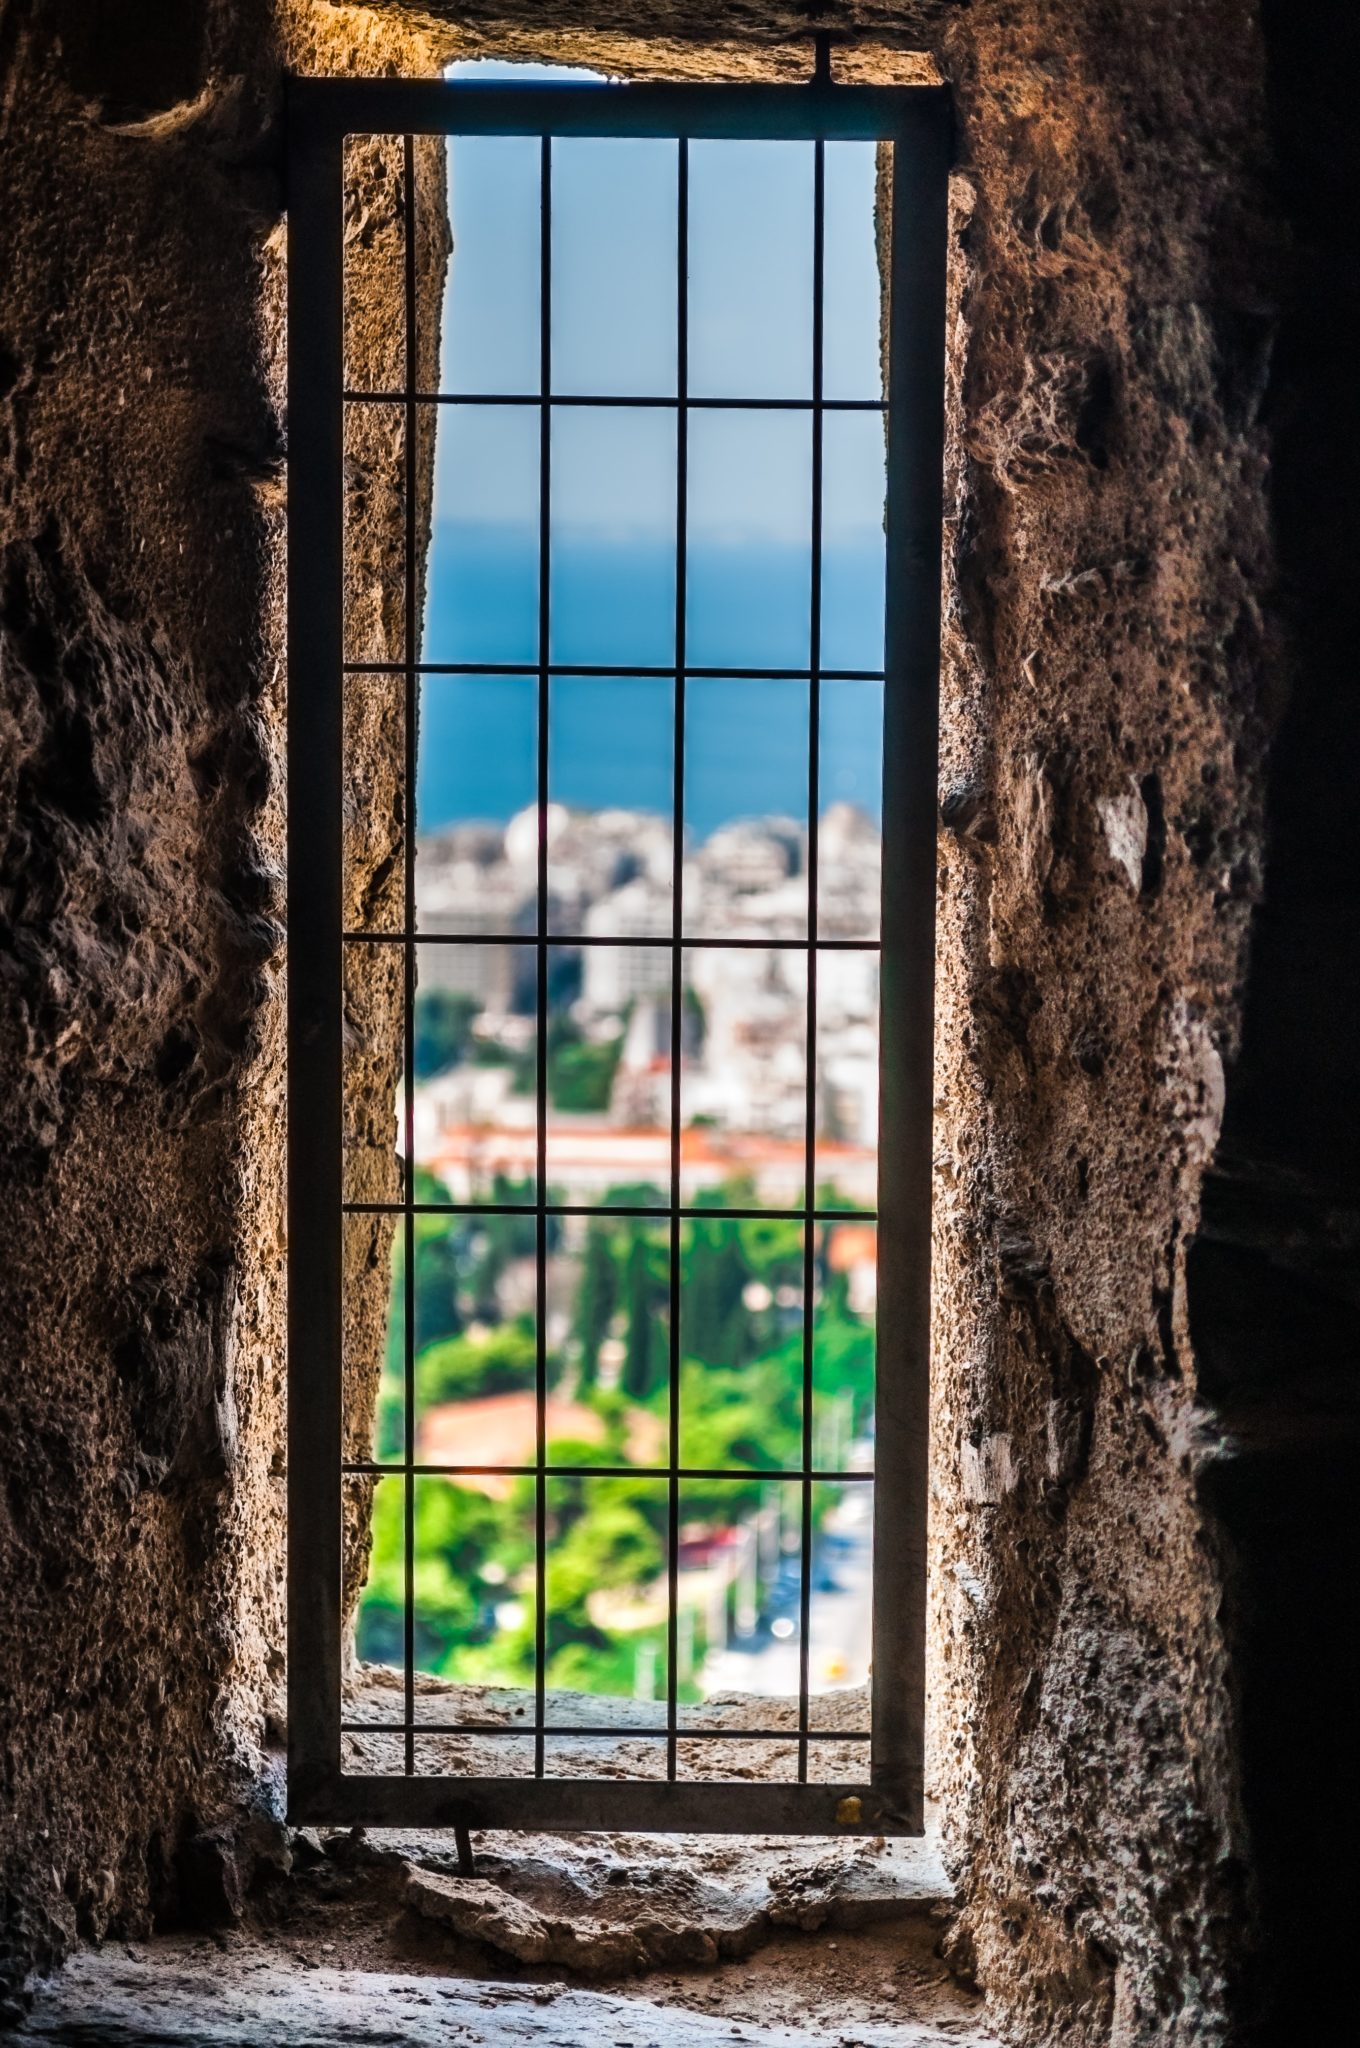 bars over a window overlooking a beautiful town